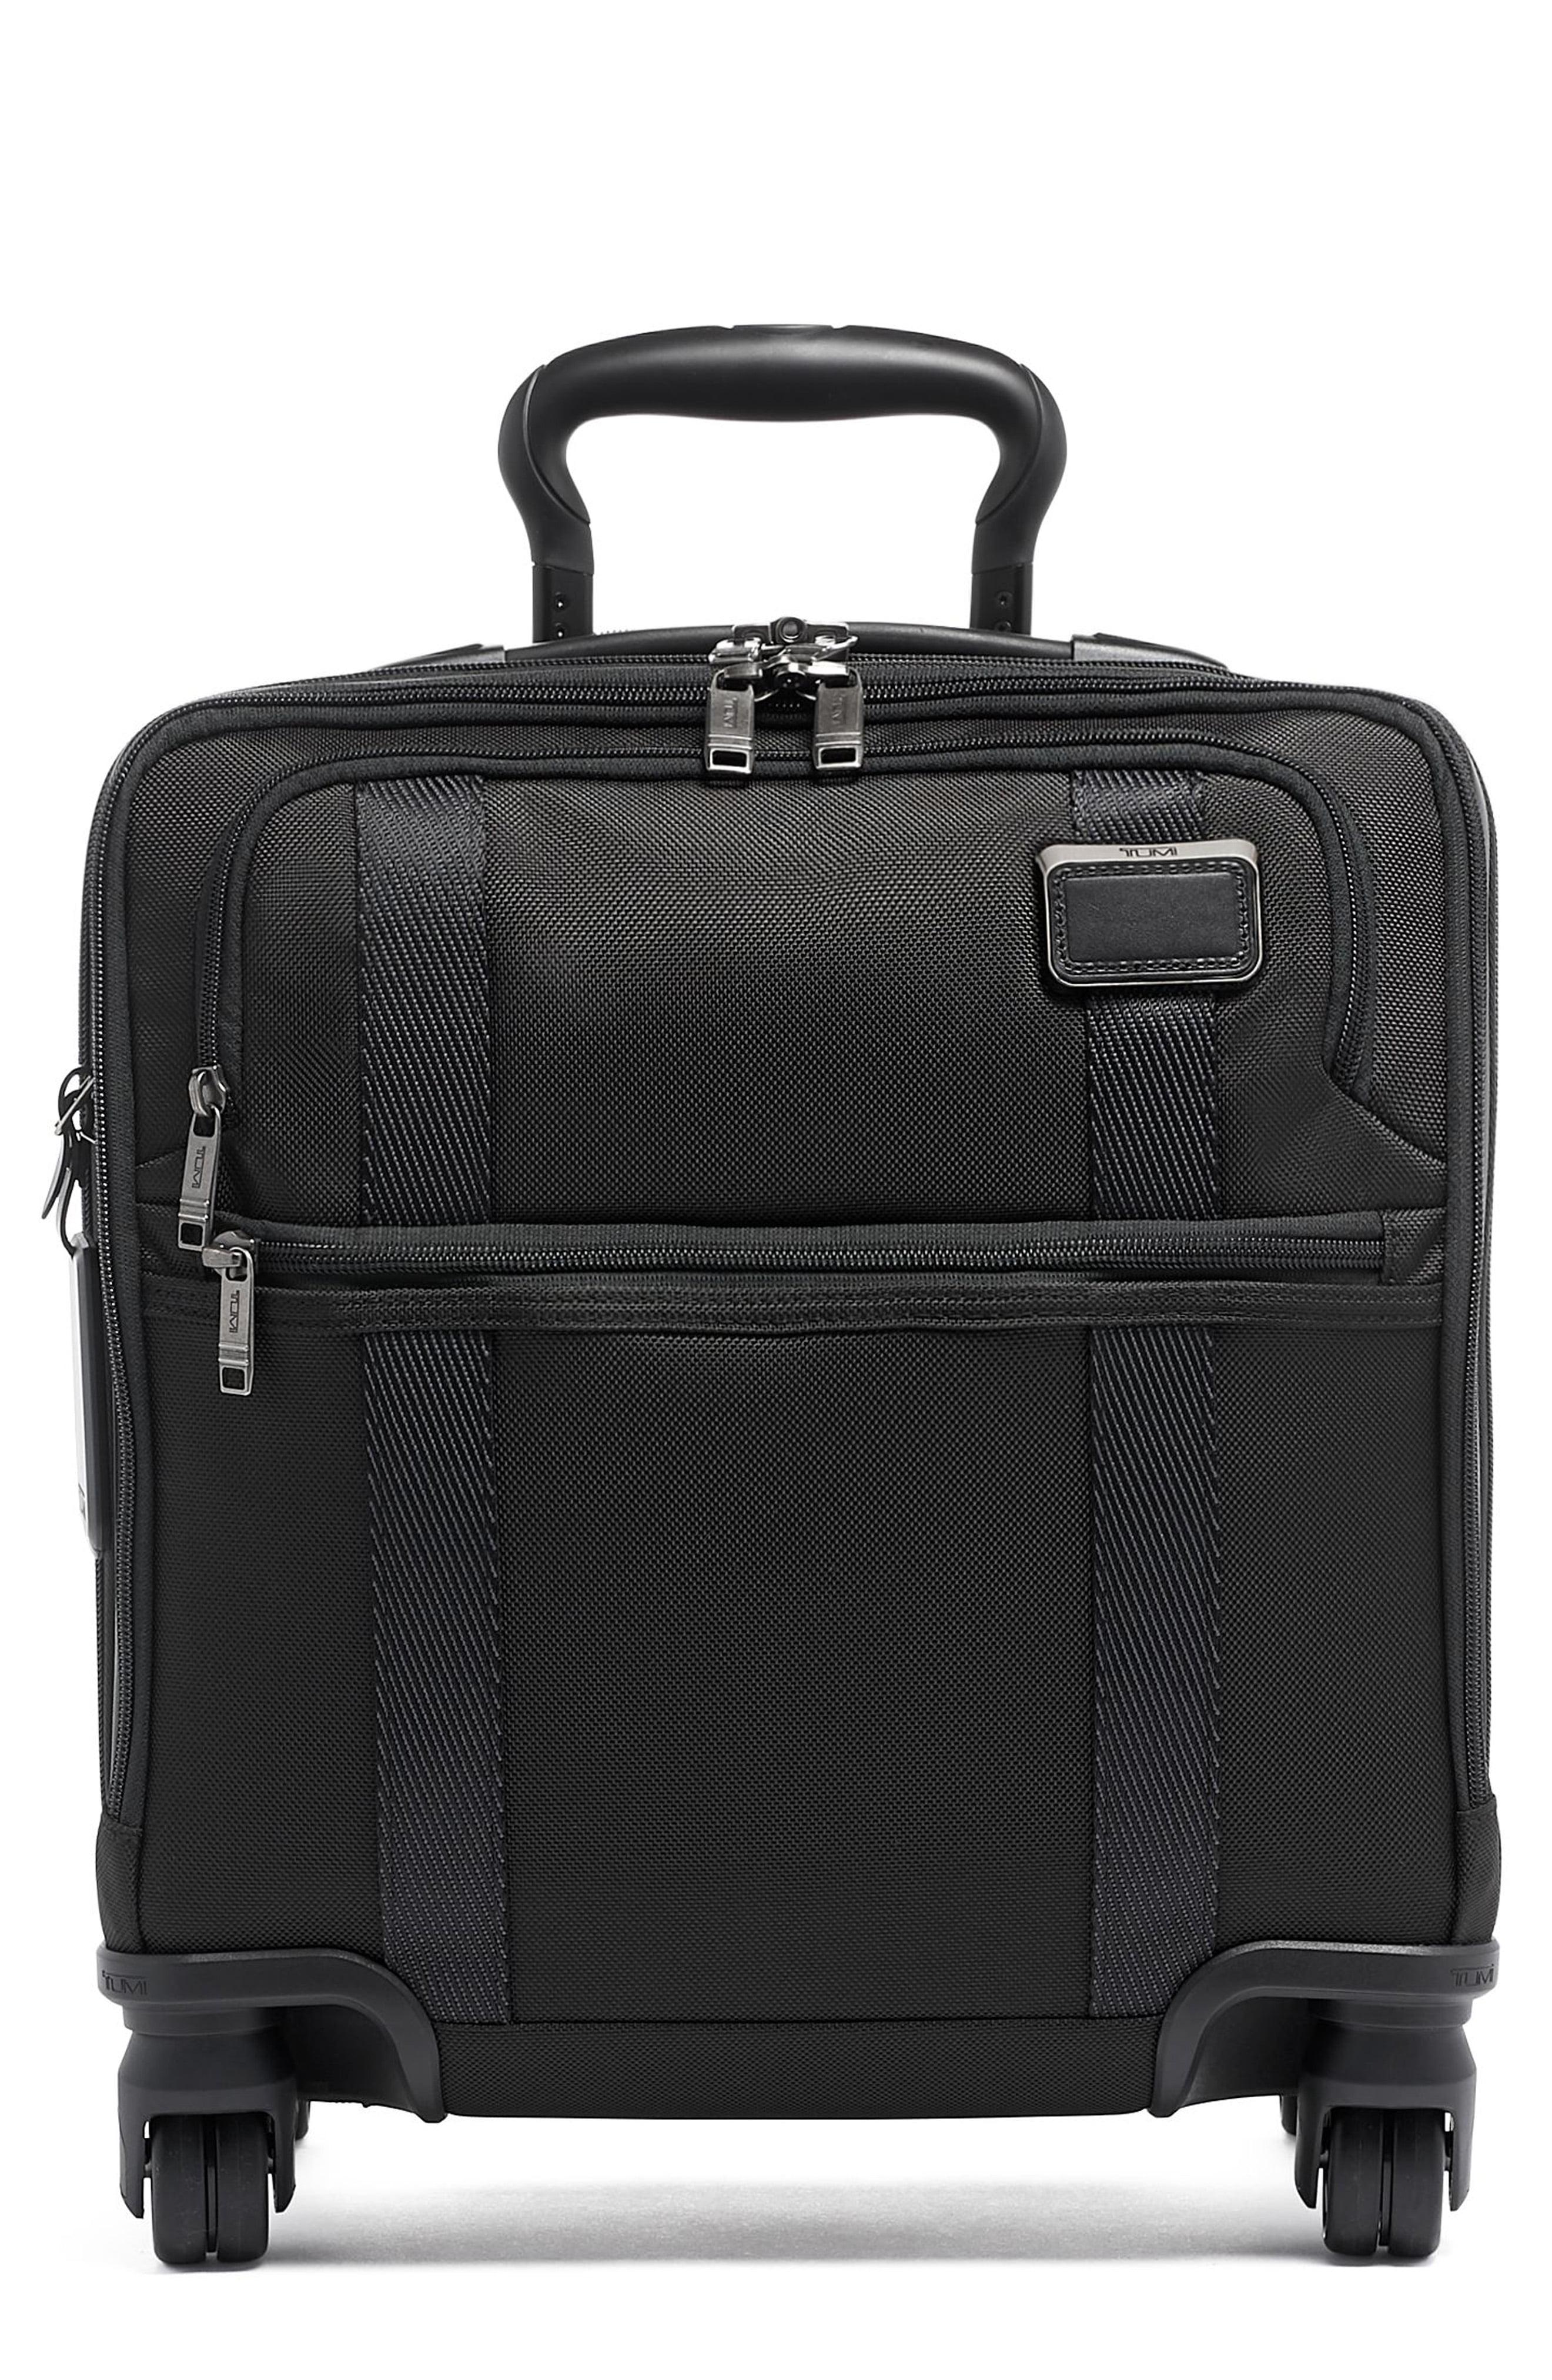 Tumi Merge Small Compact 4 Wheel Rolling Briefcase in Black - Lyst